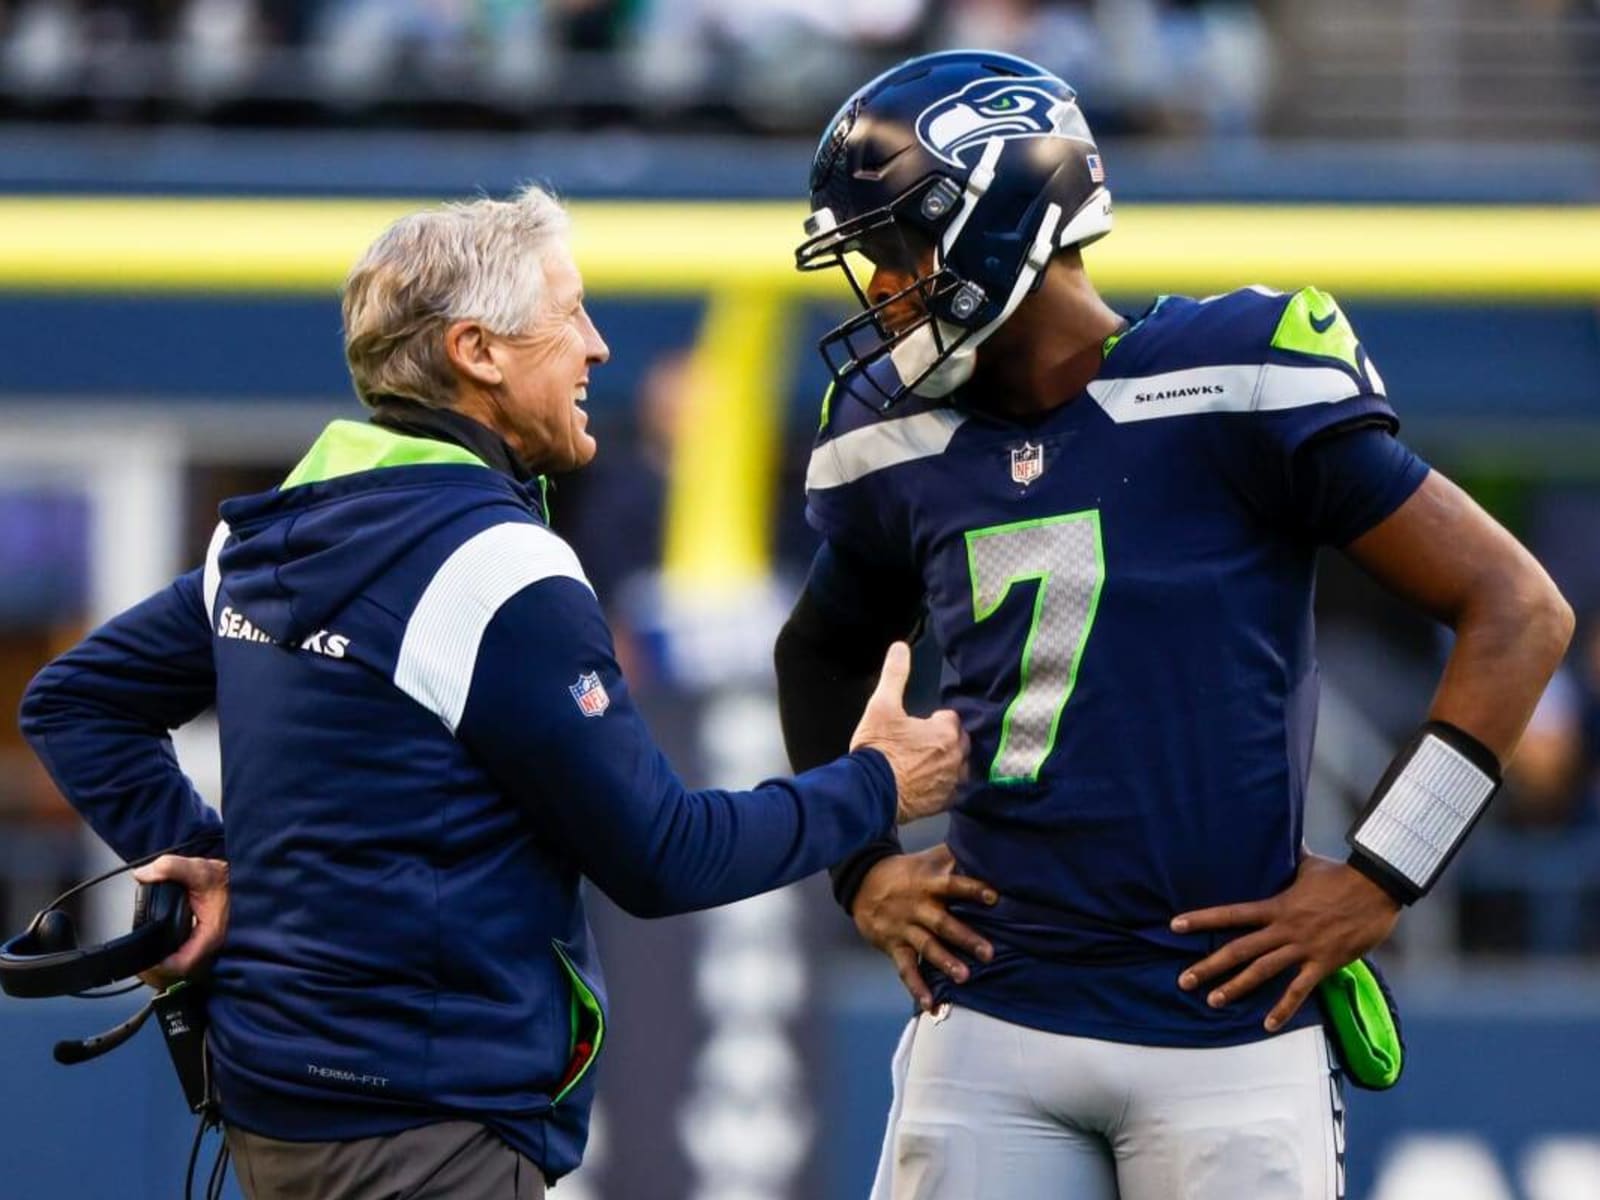 Seahawks' Pete Carroll Snubbed for NFL Coach of the Year; Why?